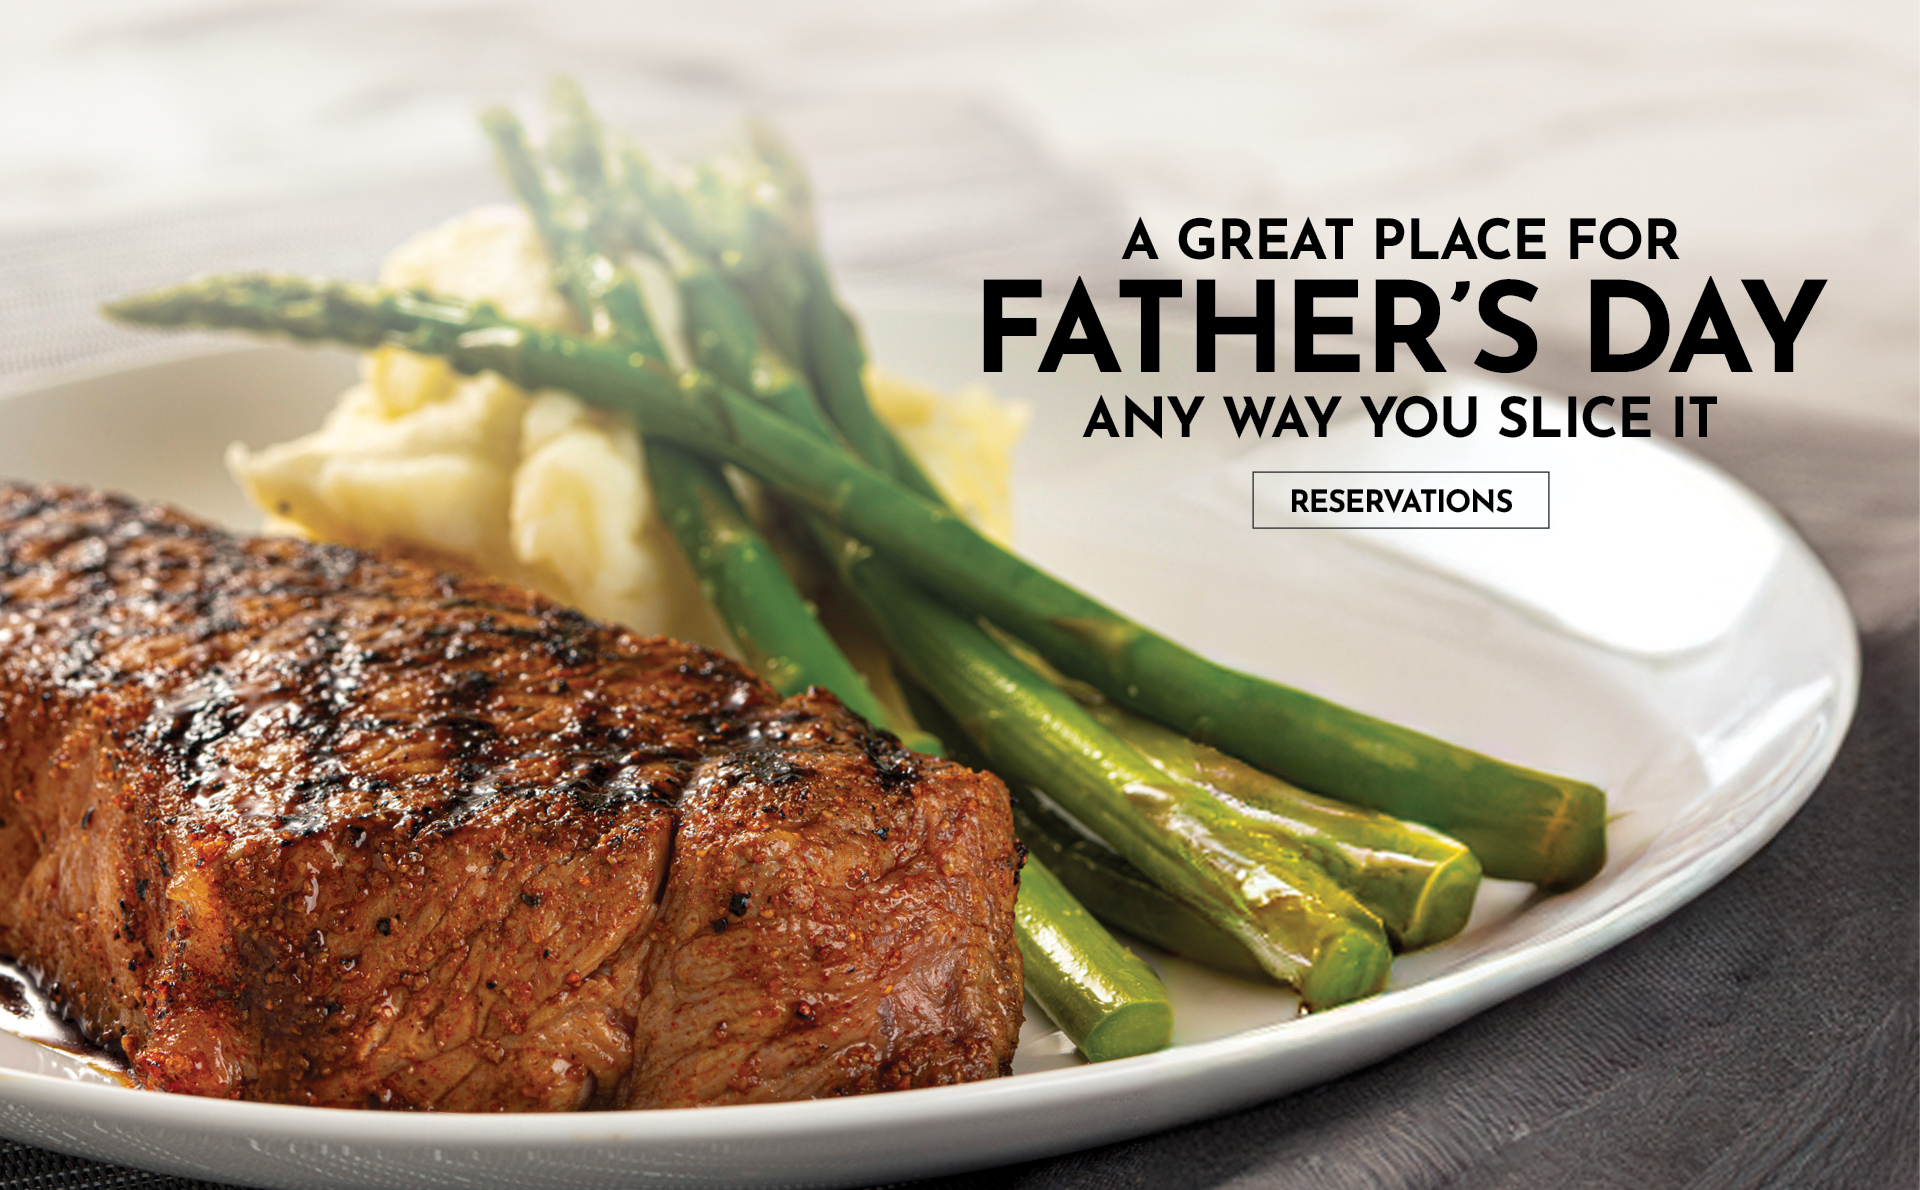 A great place for Father's Day any way you slice it. Click to make a reservation.